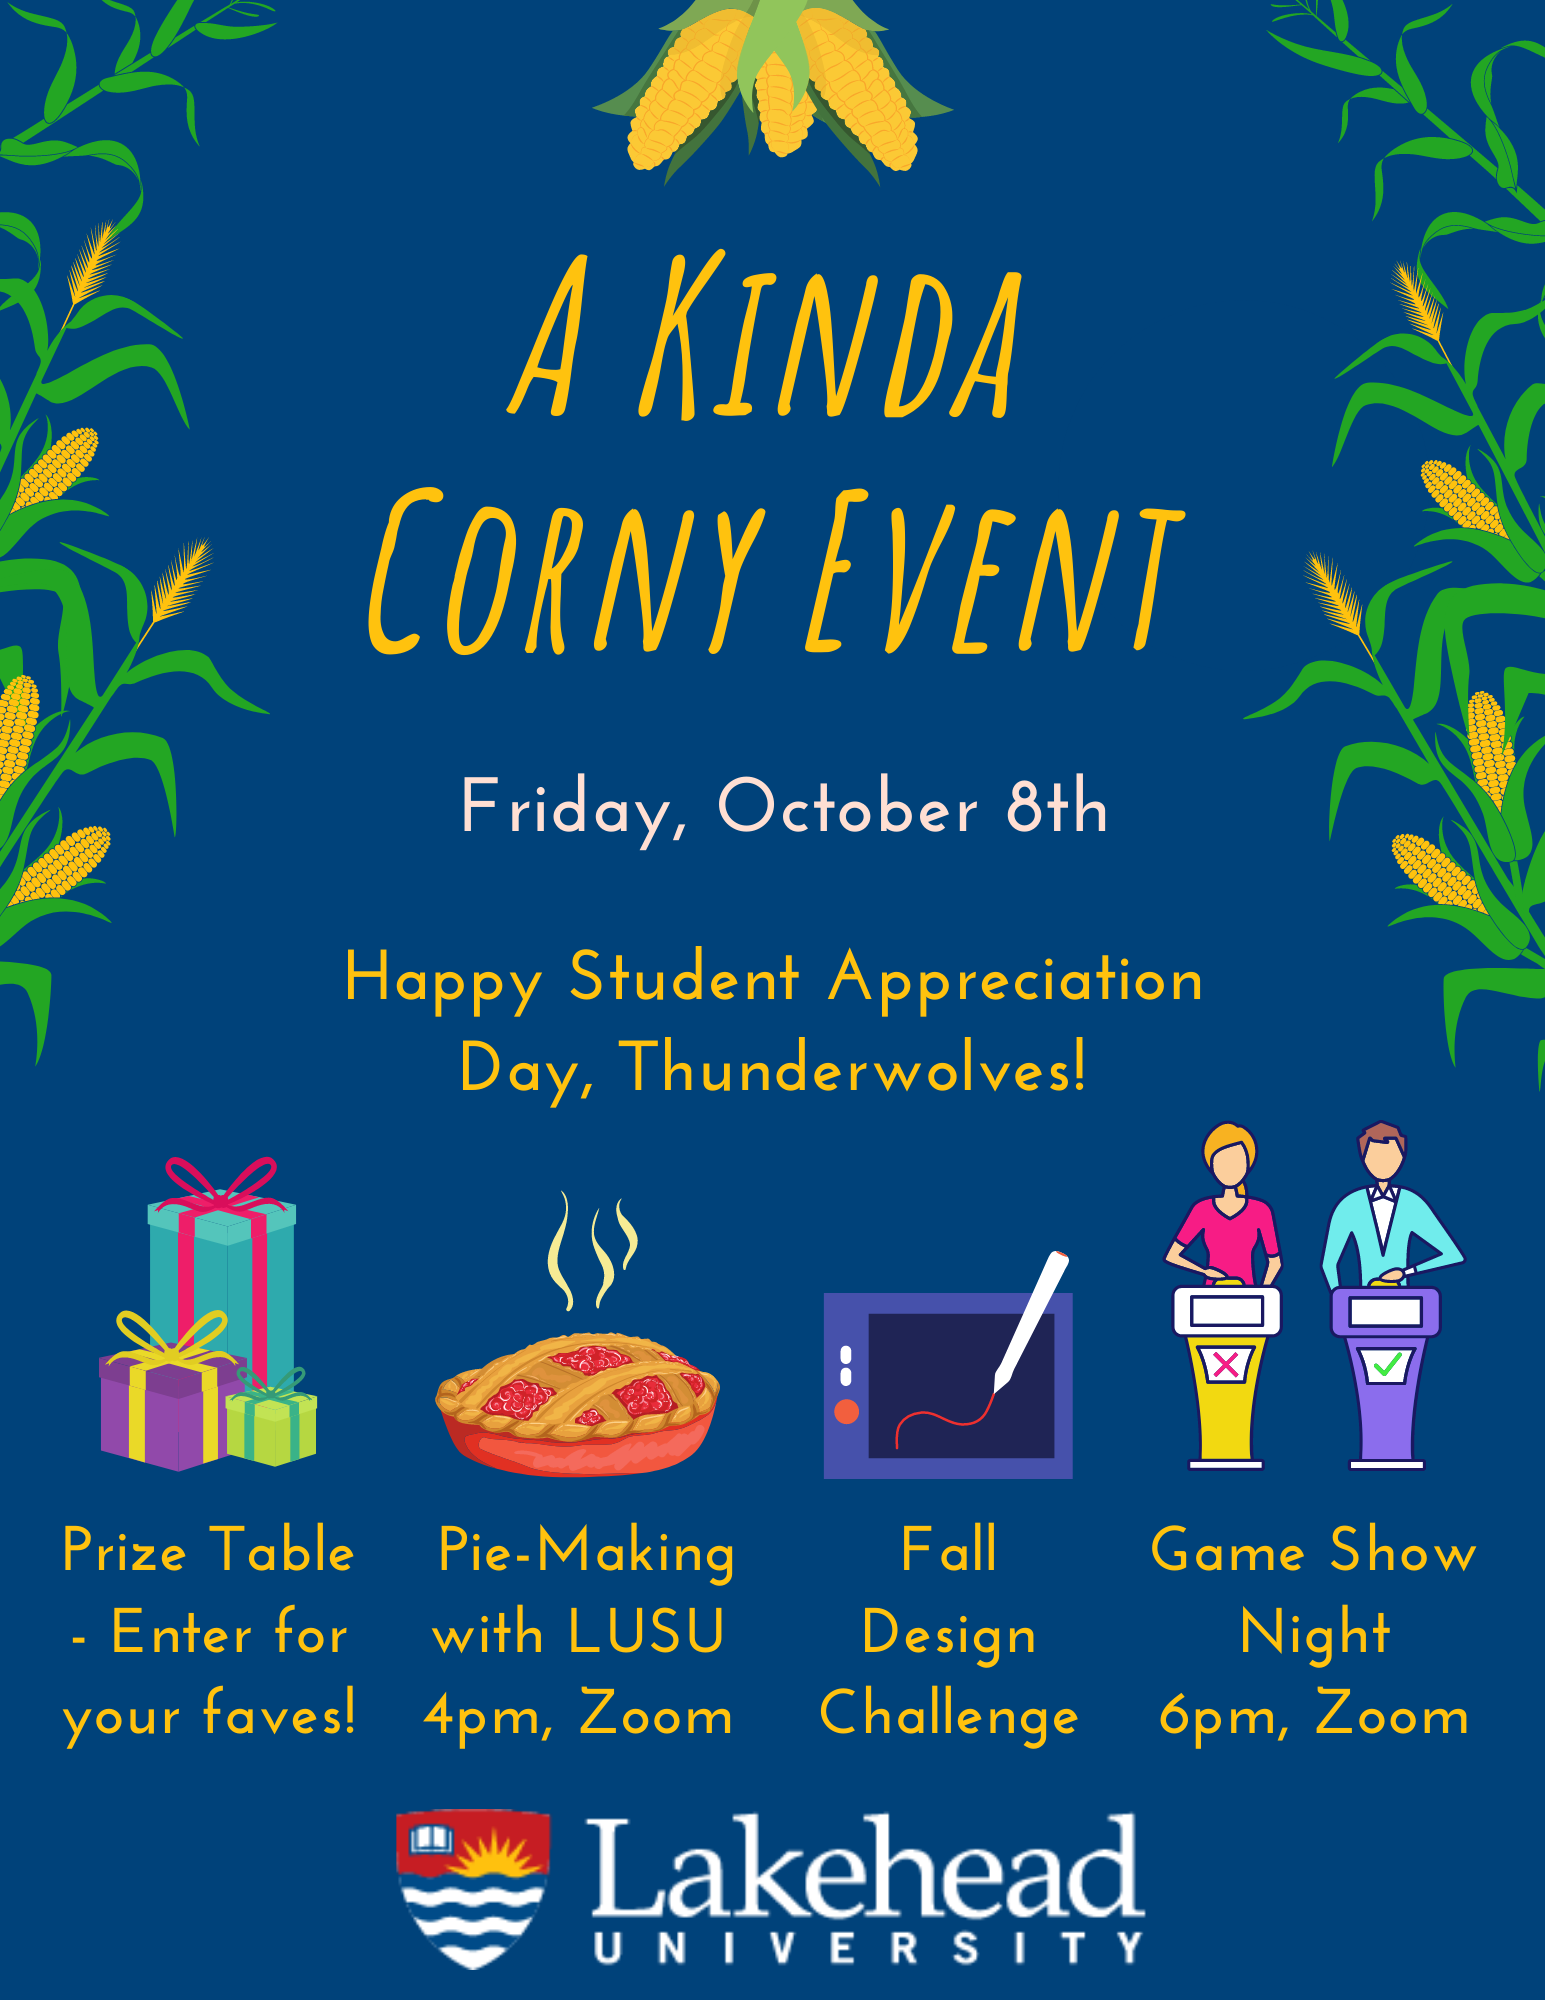 A Kinda Corny Event, happening Friday, October 8th. A prize table, pie-making, a fall design challenge, and a game night show are all happening in honour of Student Appreciation Day.